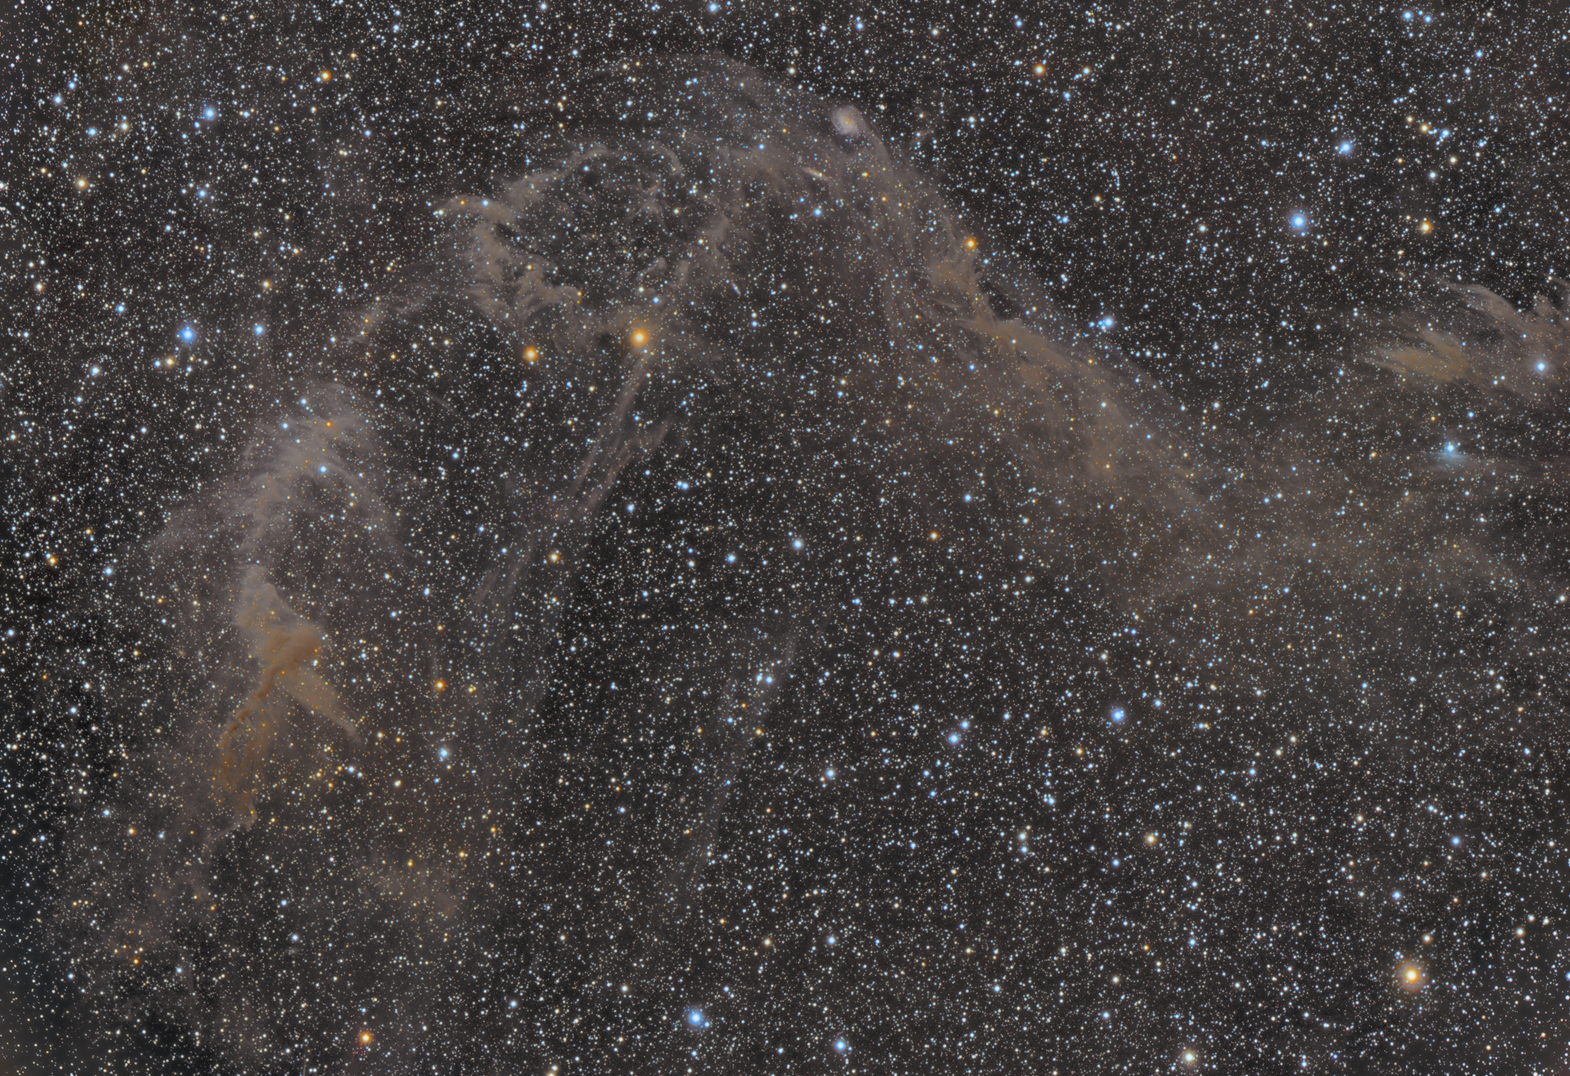 Jacobs Ladder - IC4633, IC4635 and IFN in Apus (also Sarahs Nebula)